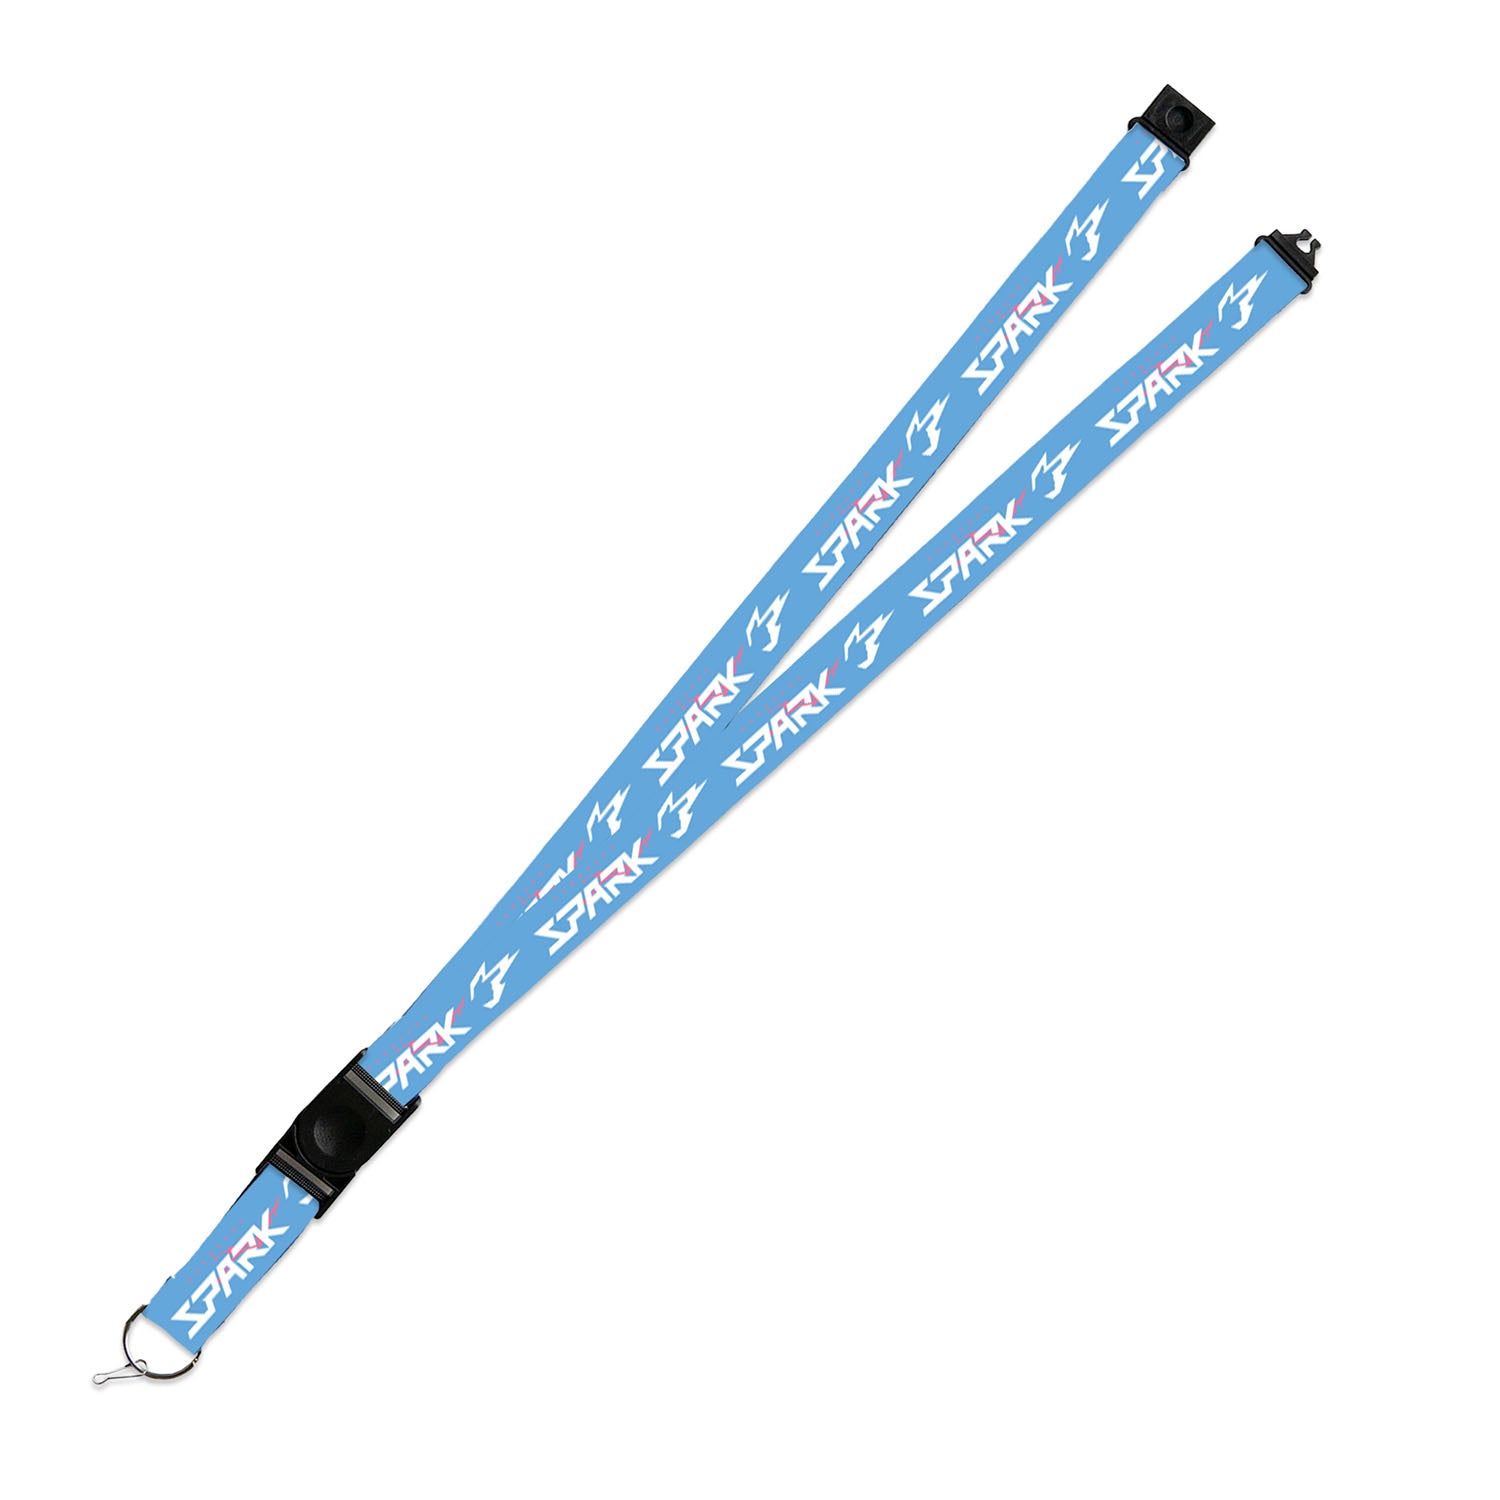 Hangzhou Spark Lanyard in Blue - Front View